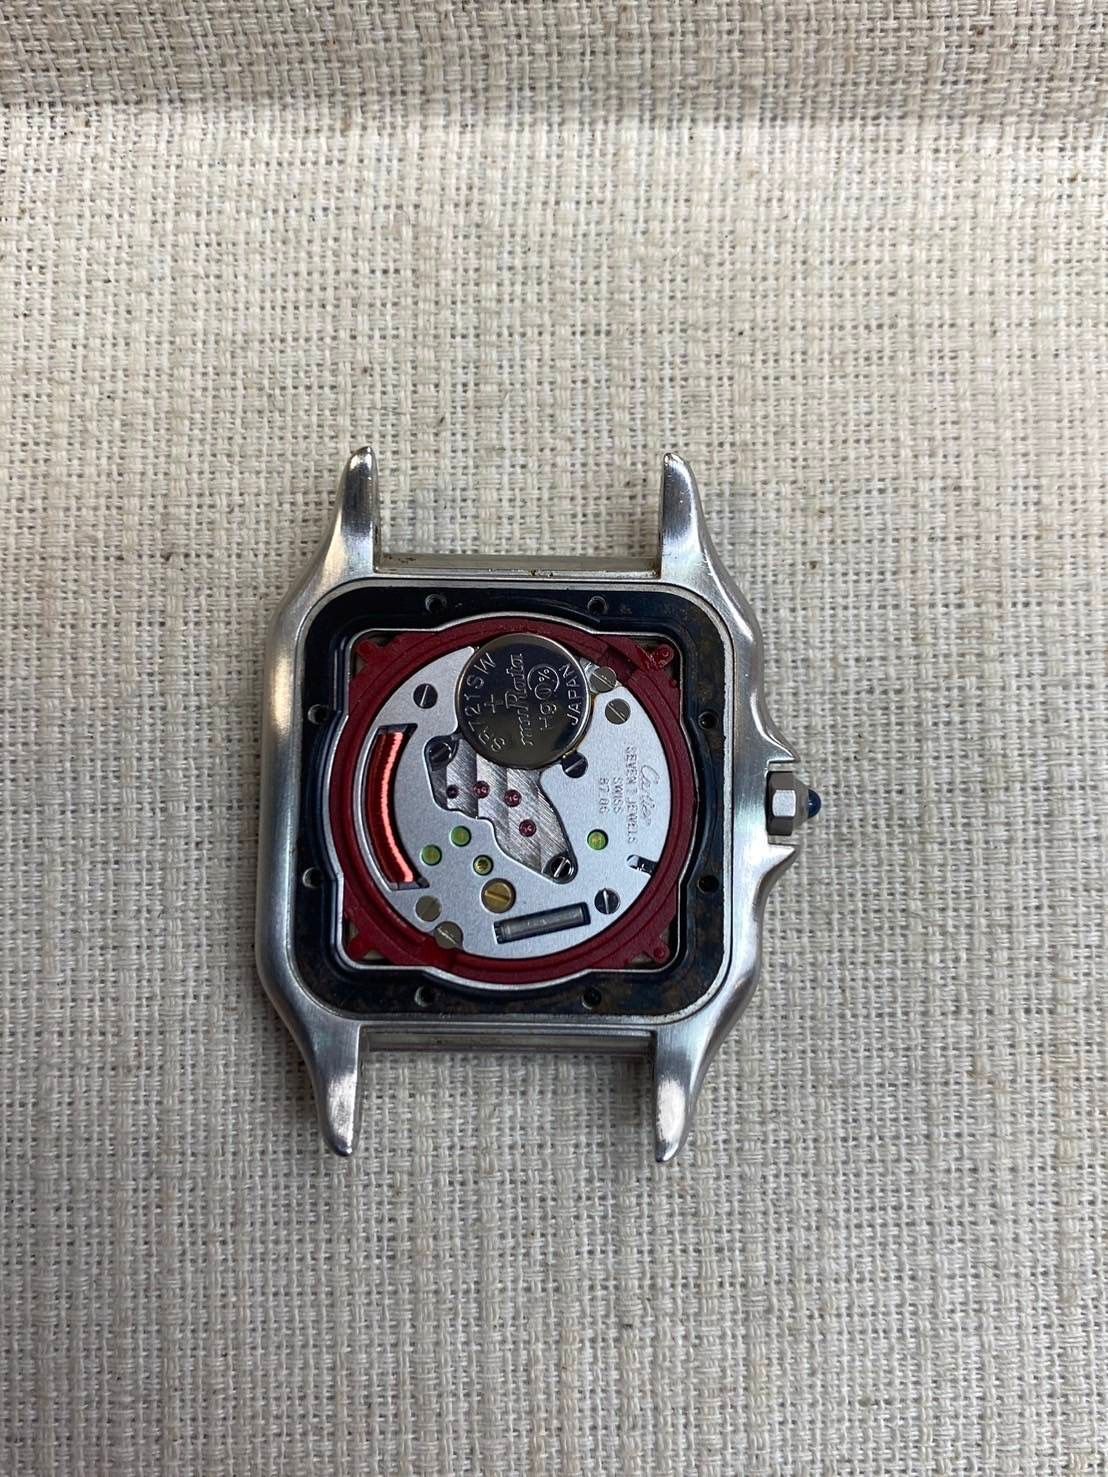 CARTIER カルティエ PANTHERE LM パンテール LM W25027B6 / 187957 クォーツ SS/YG SS/YG  アイボリー文字盤 保証書（1995年） - メルカリ